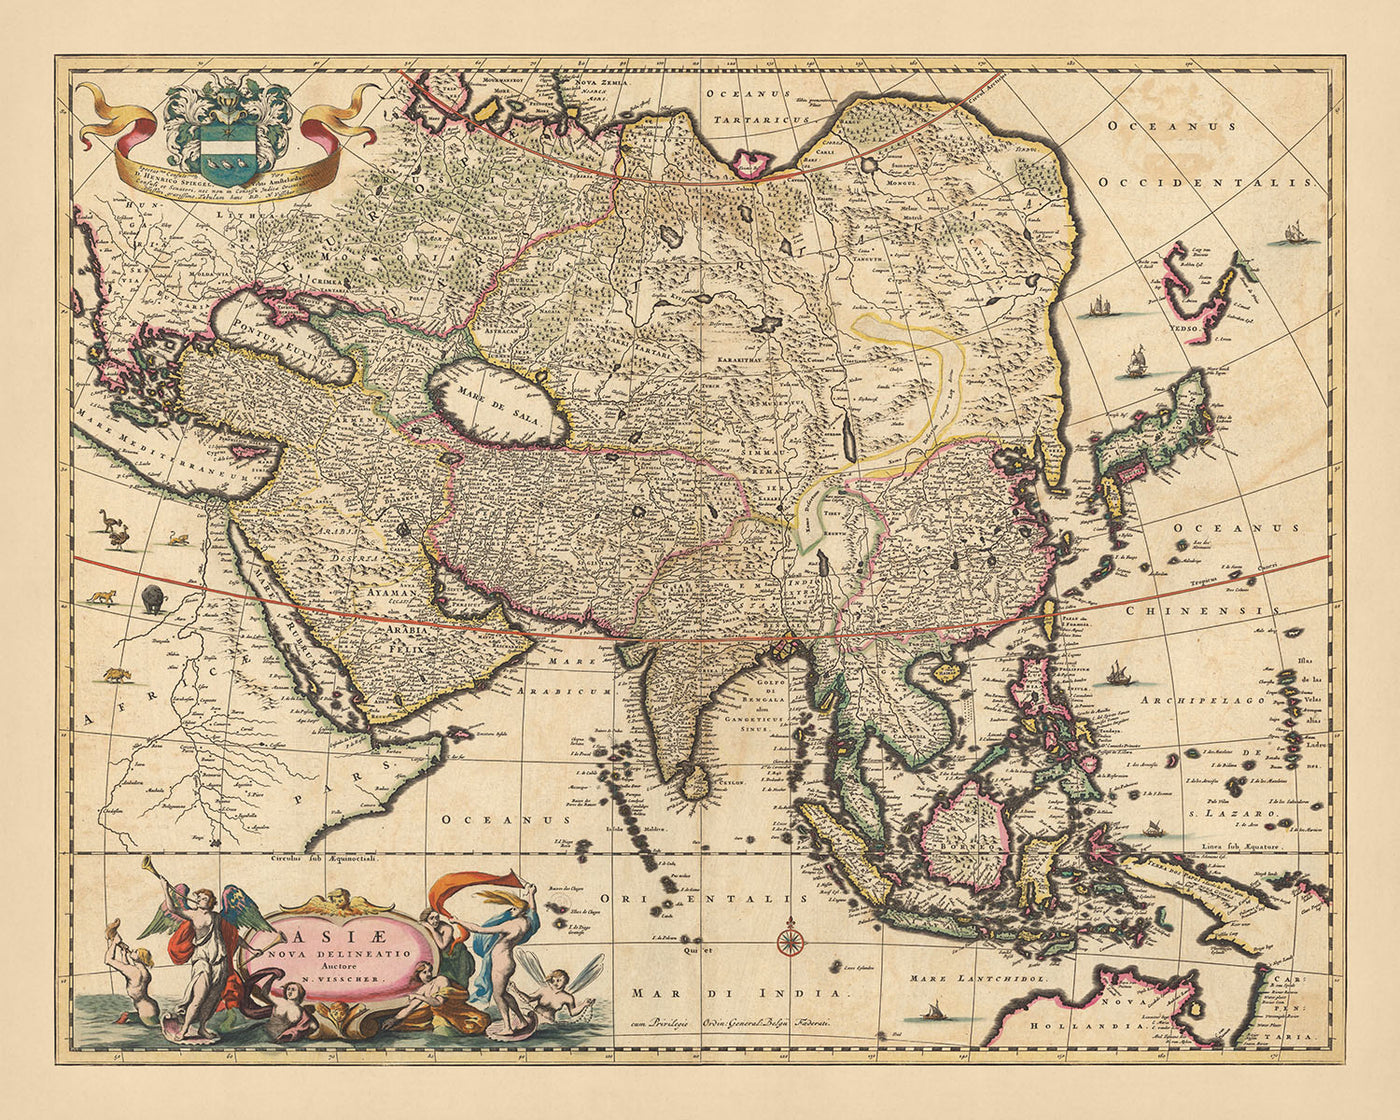 Old Map of Asia by Visscher, 1690: Middle East, East Asia, Central Asia, South Asia, Southeast Asia